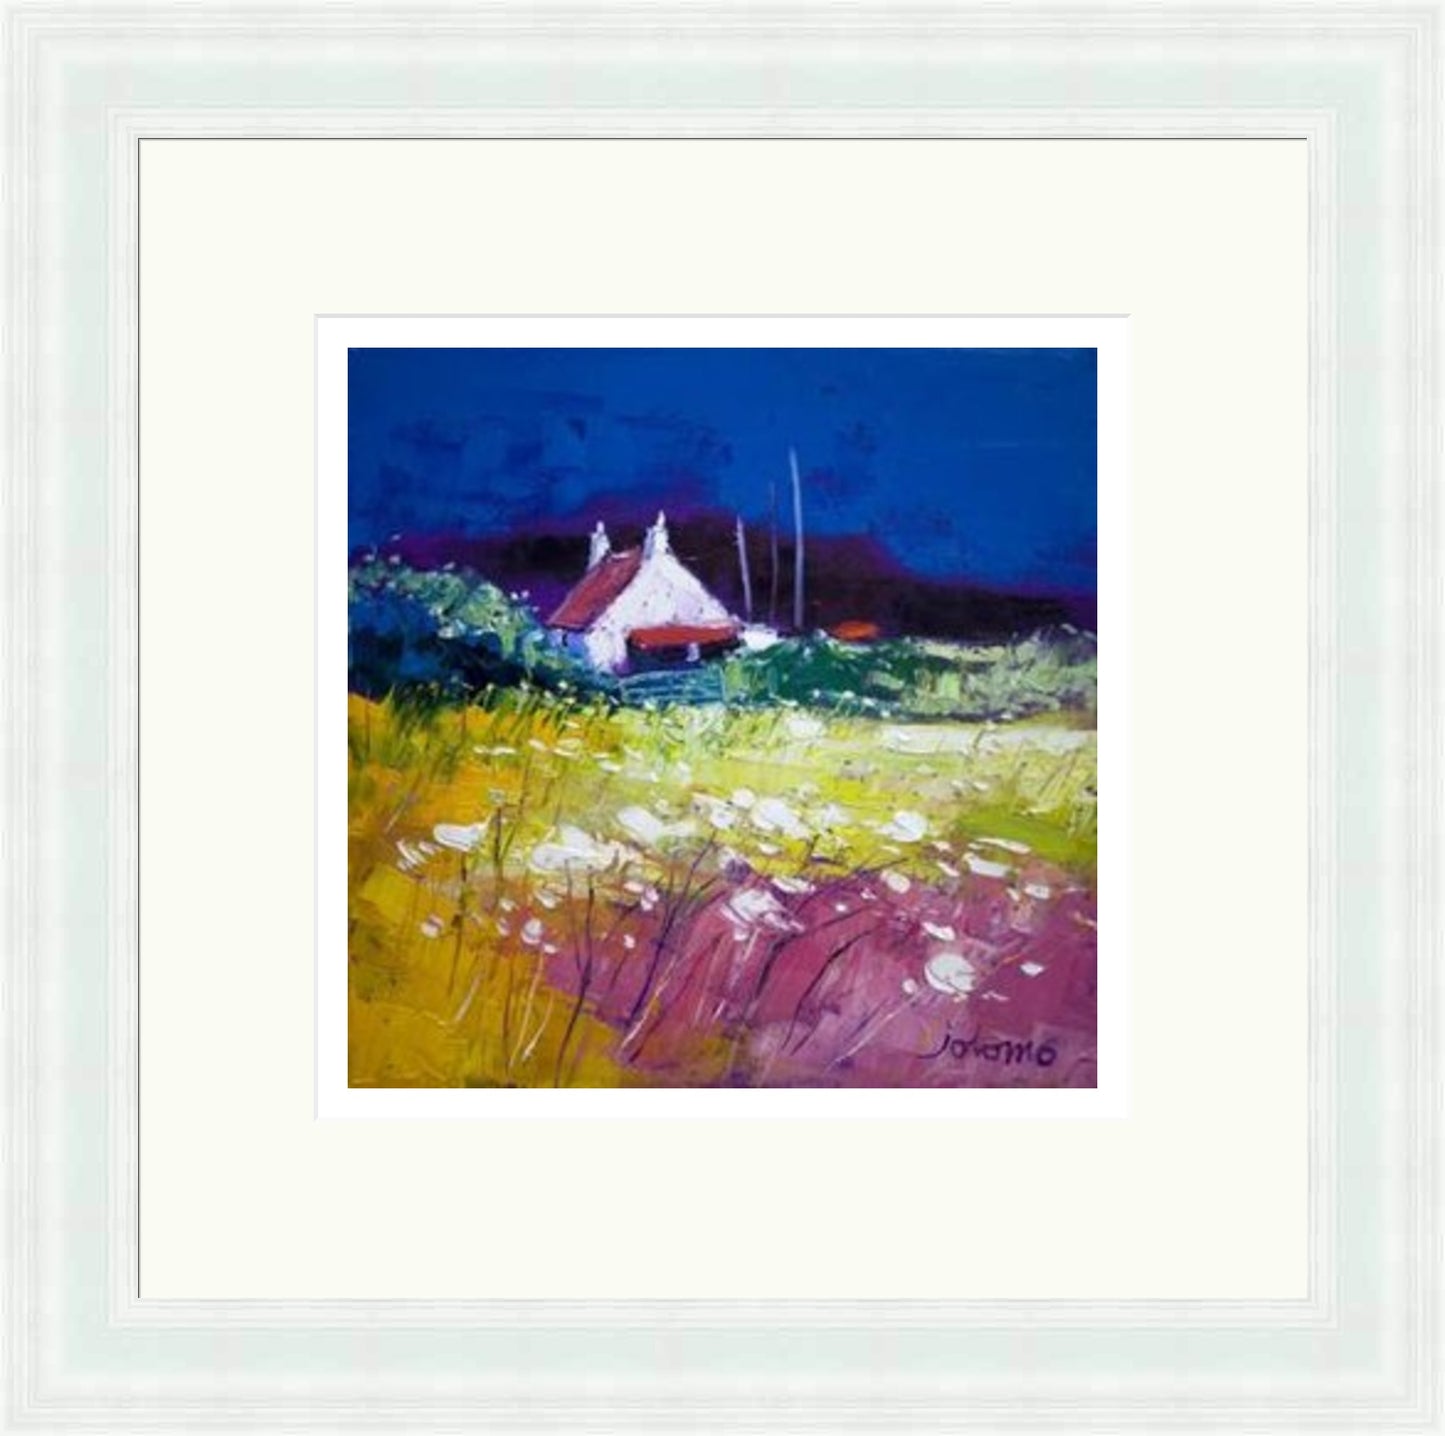 Autumn Gloaming, Isle of Gigha Signed Limited Edition by John Lowrie Morrison (JOLOMO)